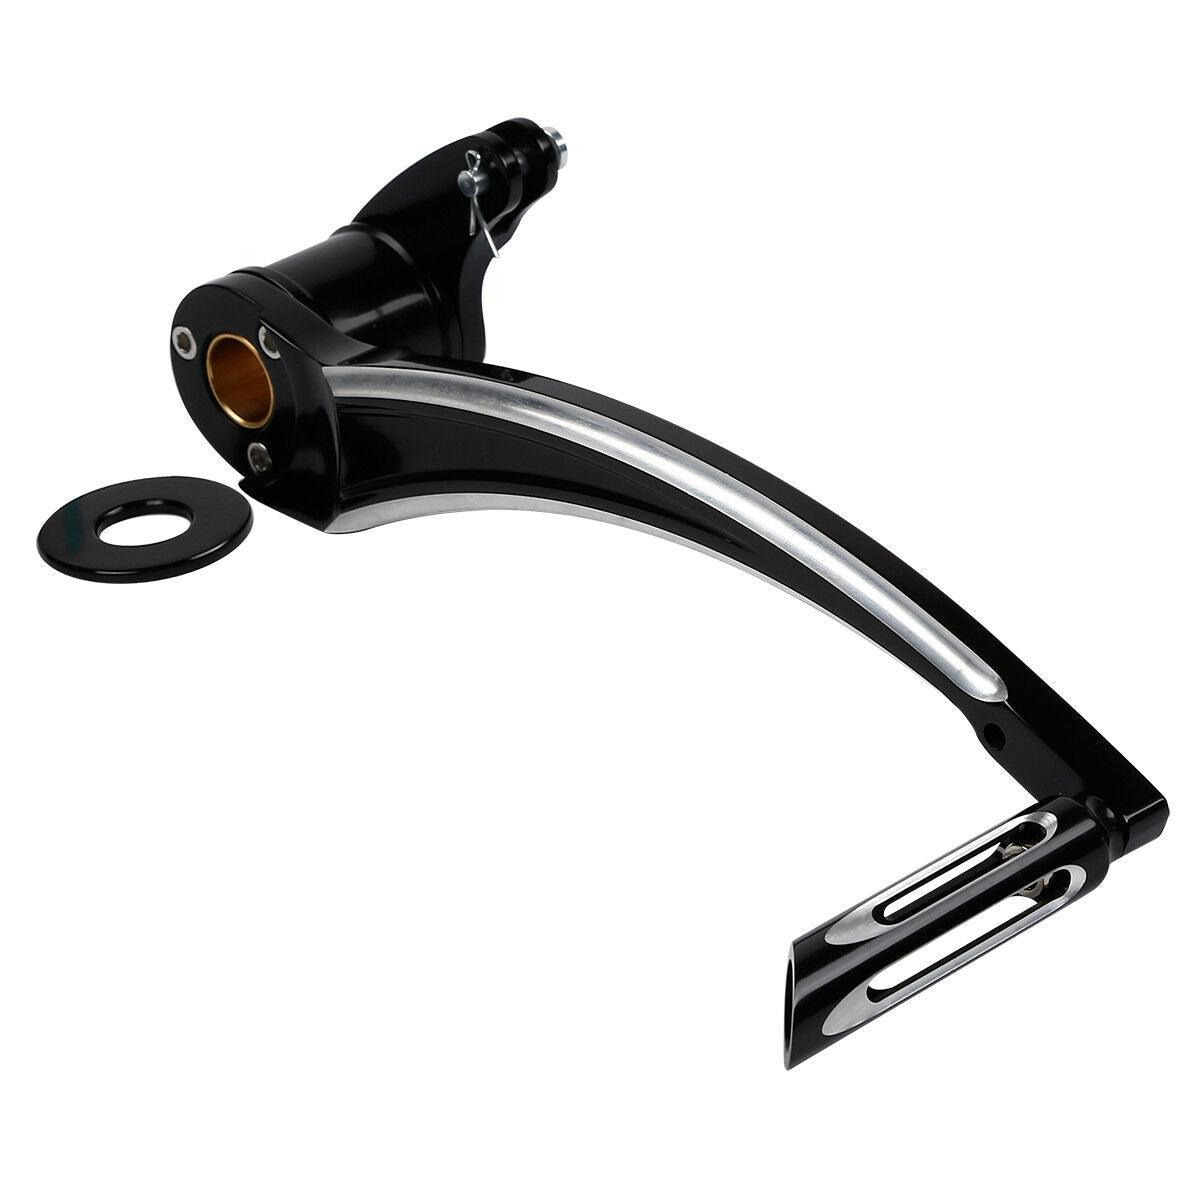 Black Brake Arm Lever&Peg Pedal Fit For Harley Electra Street Road Glide 08-13 - Moto Life Products